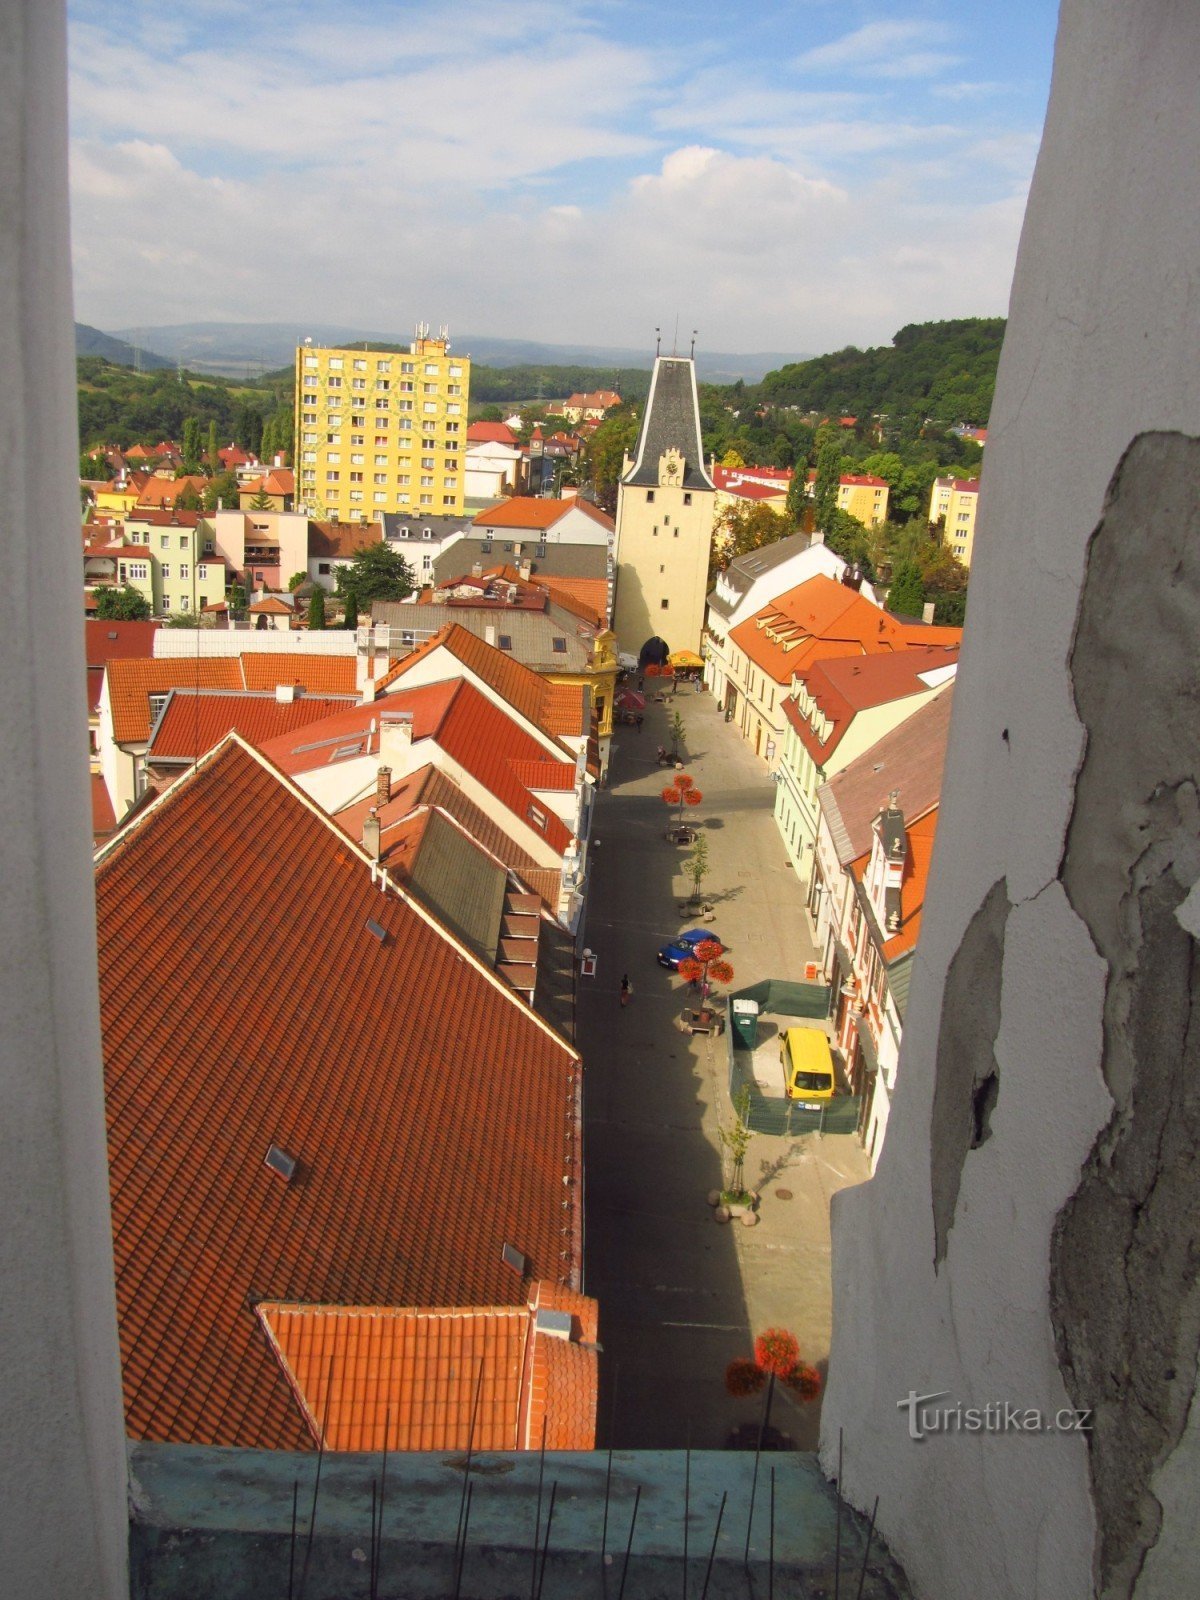 Mikulov Gate in Kadani - view from the town hall tower